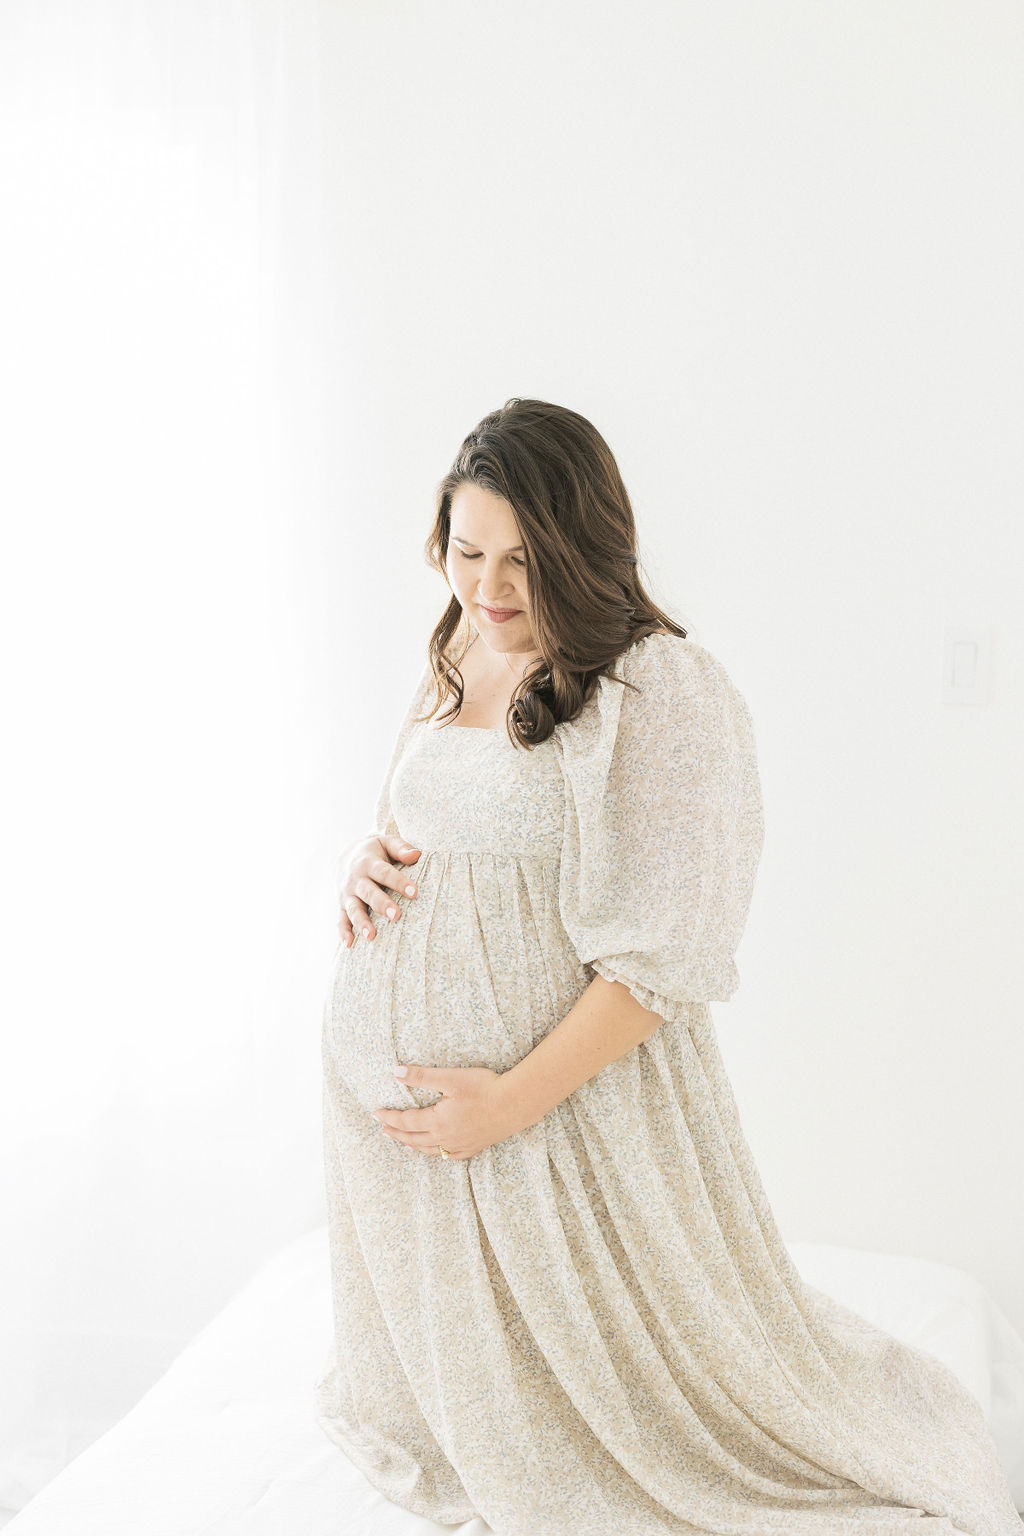 mom to be in cream maternity gown cradling her bump in a studio